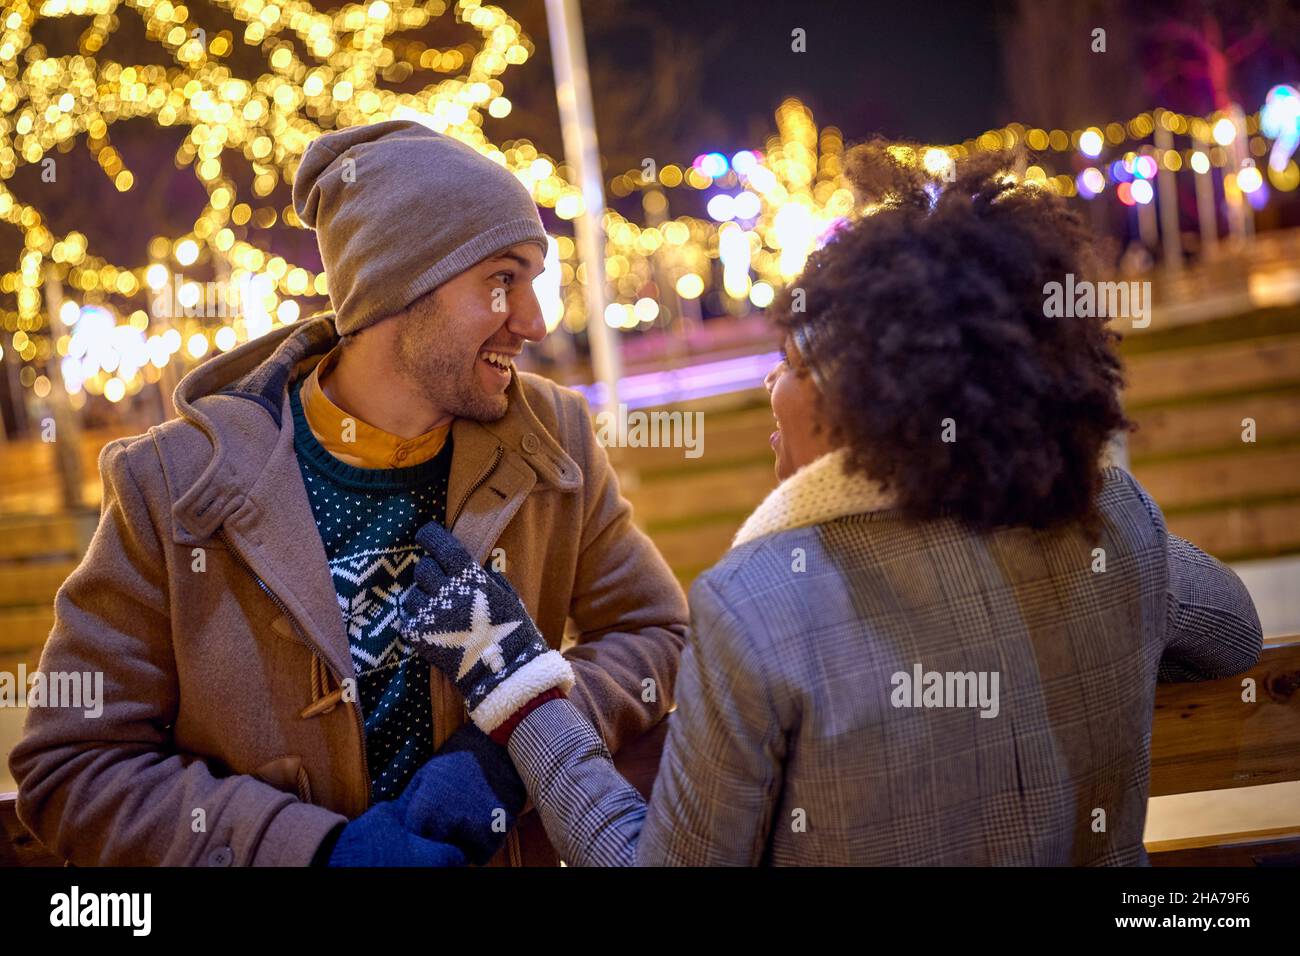 Romantic man and woman  dating  at night Street Decorated With Winter Lights Stock Photo